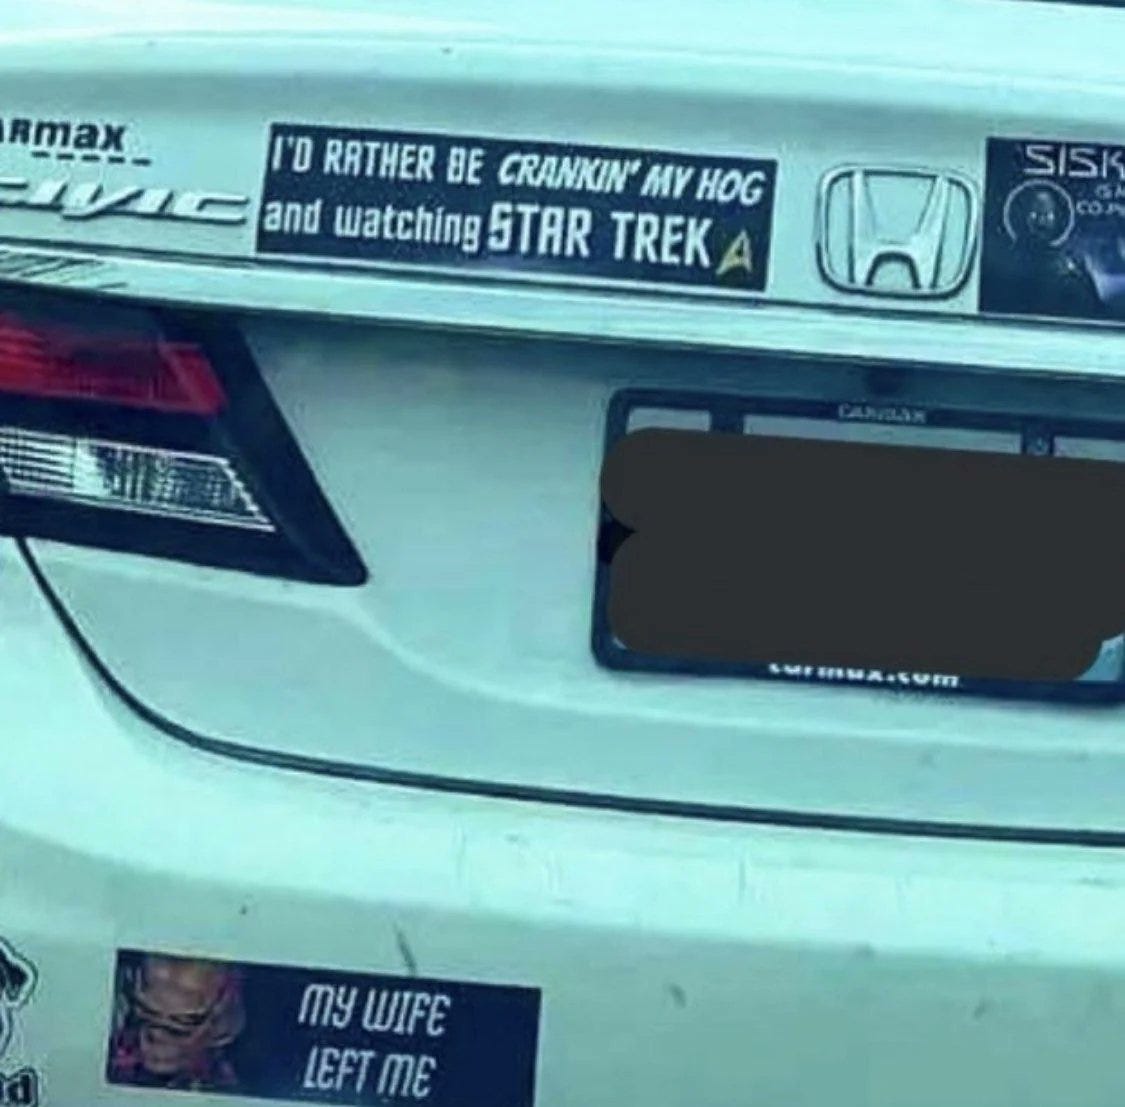 Honda Civic with bumper stickers that say I'D RATHER BE CRANKIN' MY HOG AND WATCHING STAR TREK and SISKO IS MY CO-PILOT and one with Quark wearing sunglasses that says MY WIFE LEFT ME